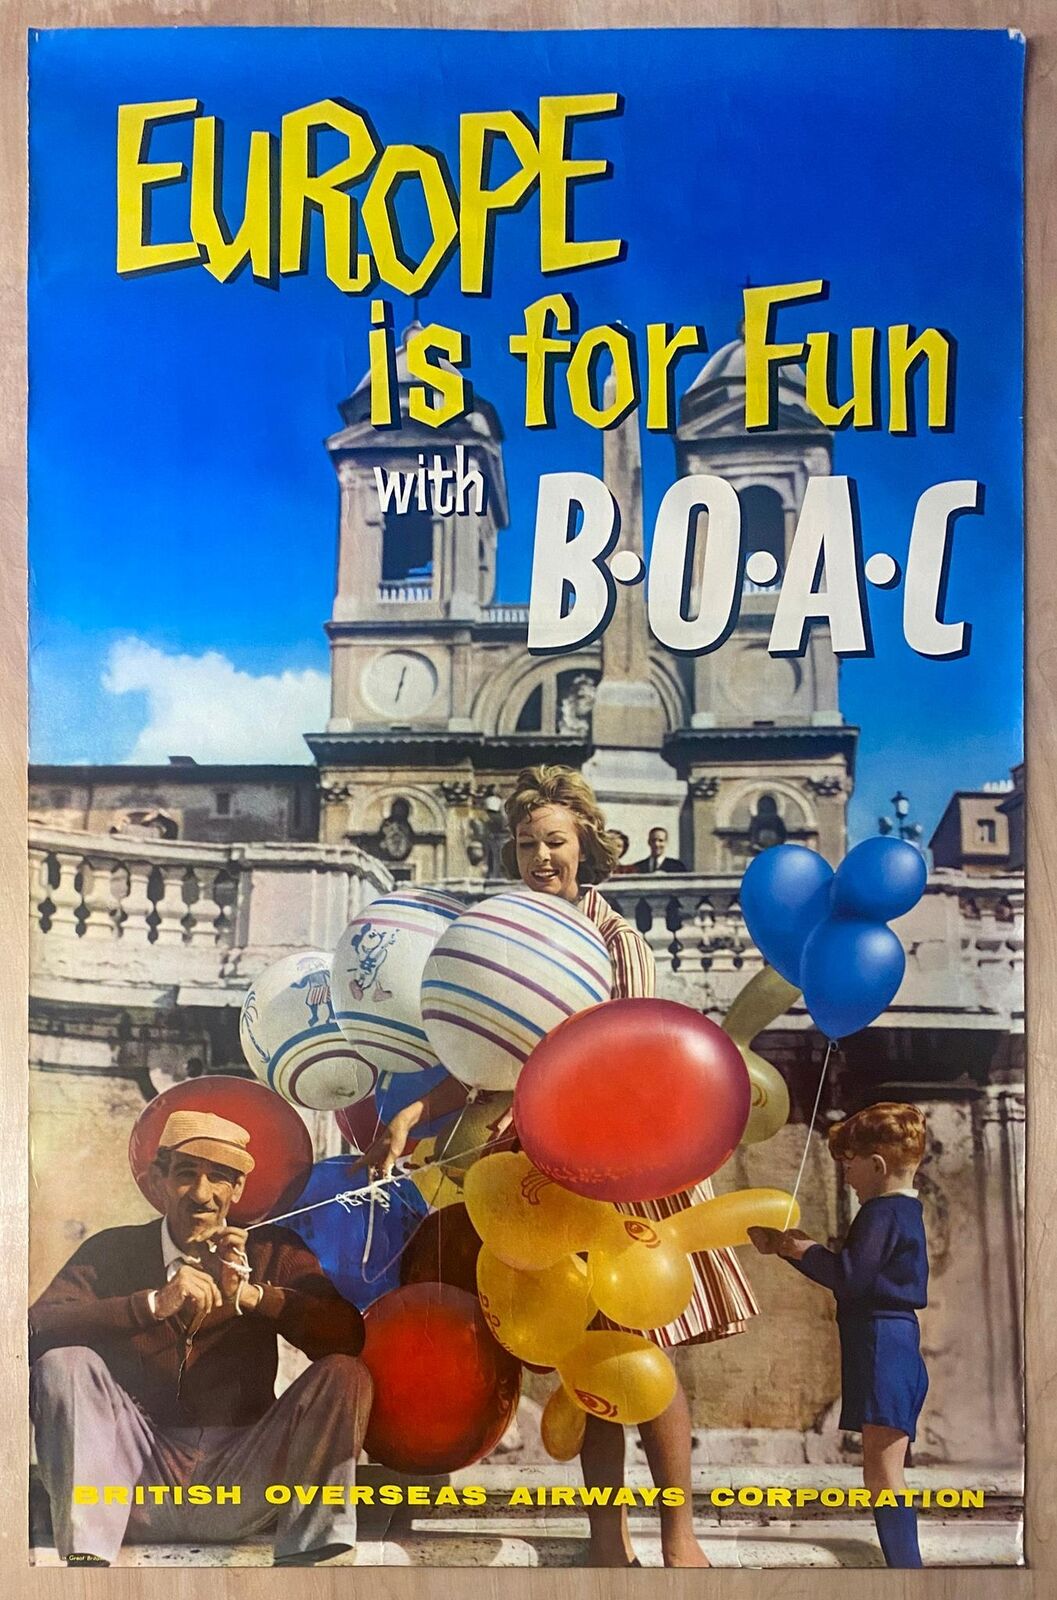 1961 Europe If For Fun With BOAC Poster British Overseas Airways Corp Vintage